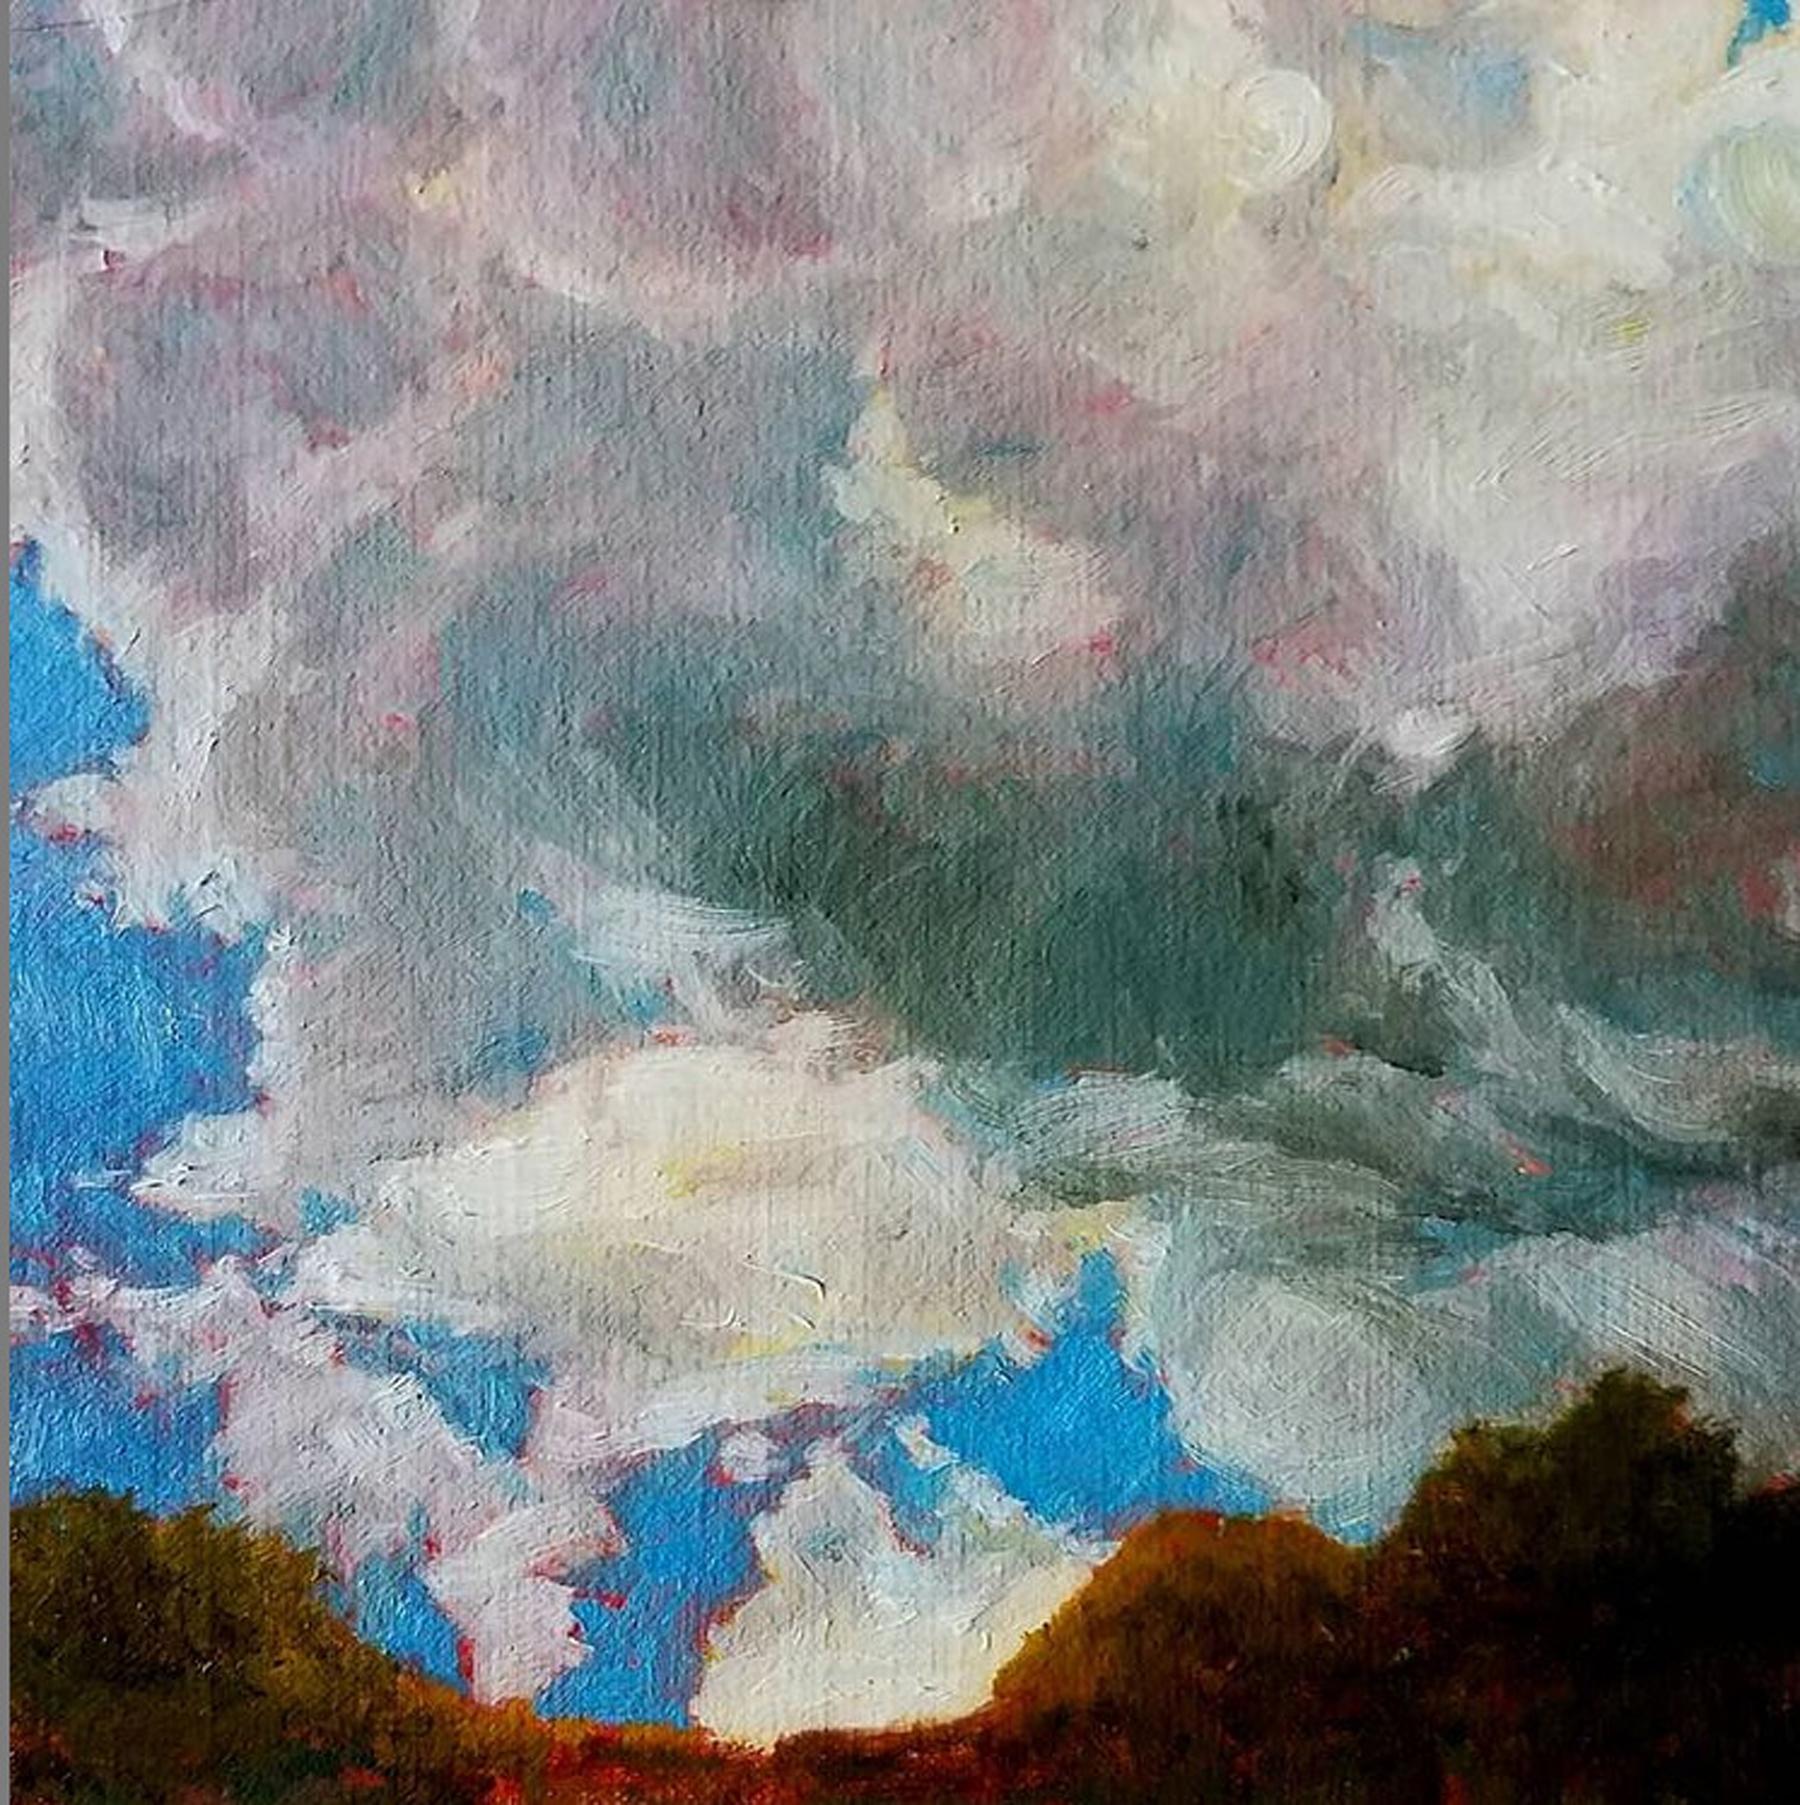 Storm Clouds Breaking Up Over Mountains contemporary landscape, 2021